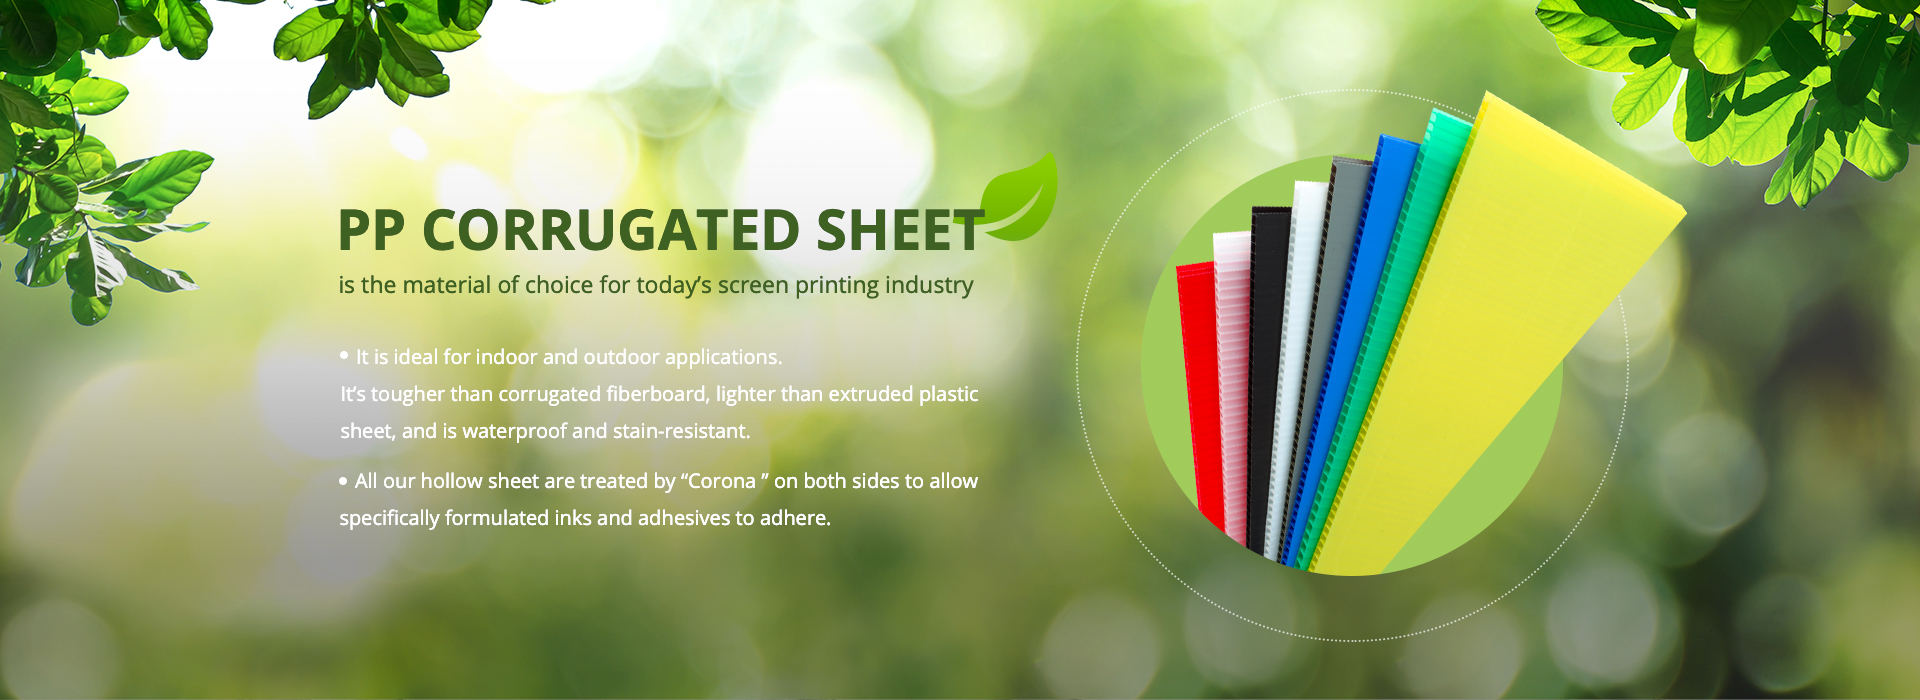 Colored PP Corrugated Sheets for Advertising